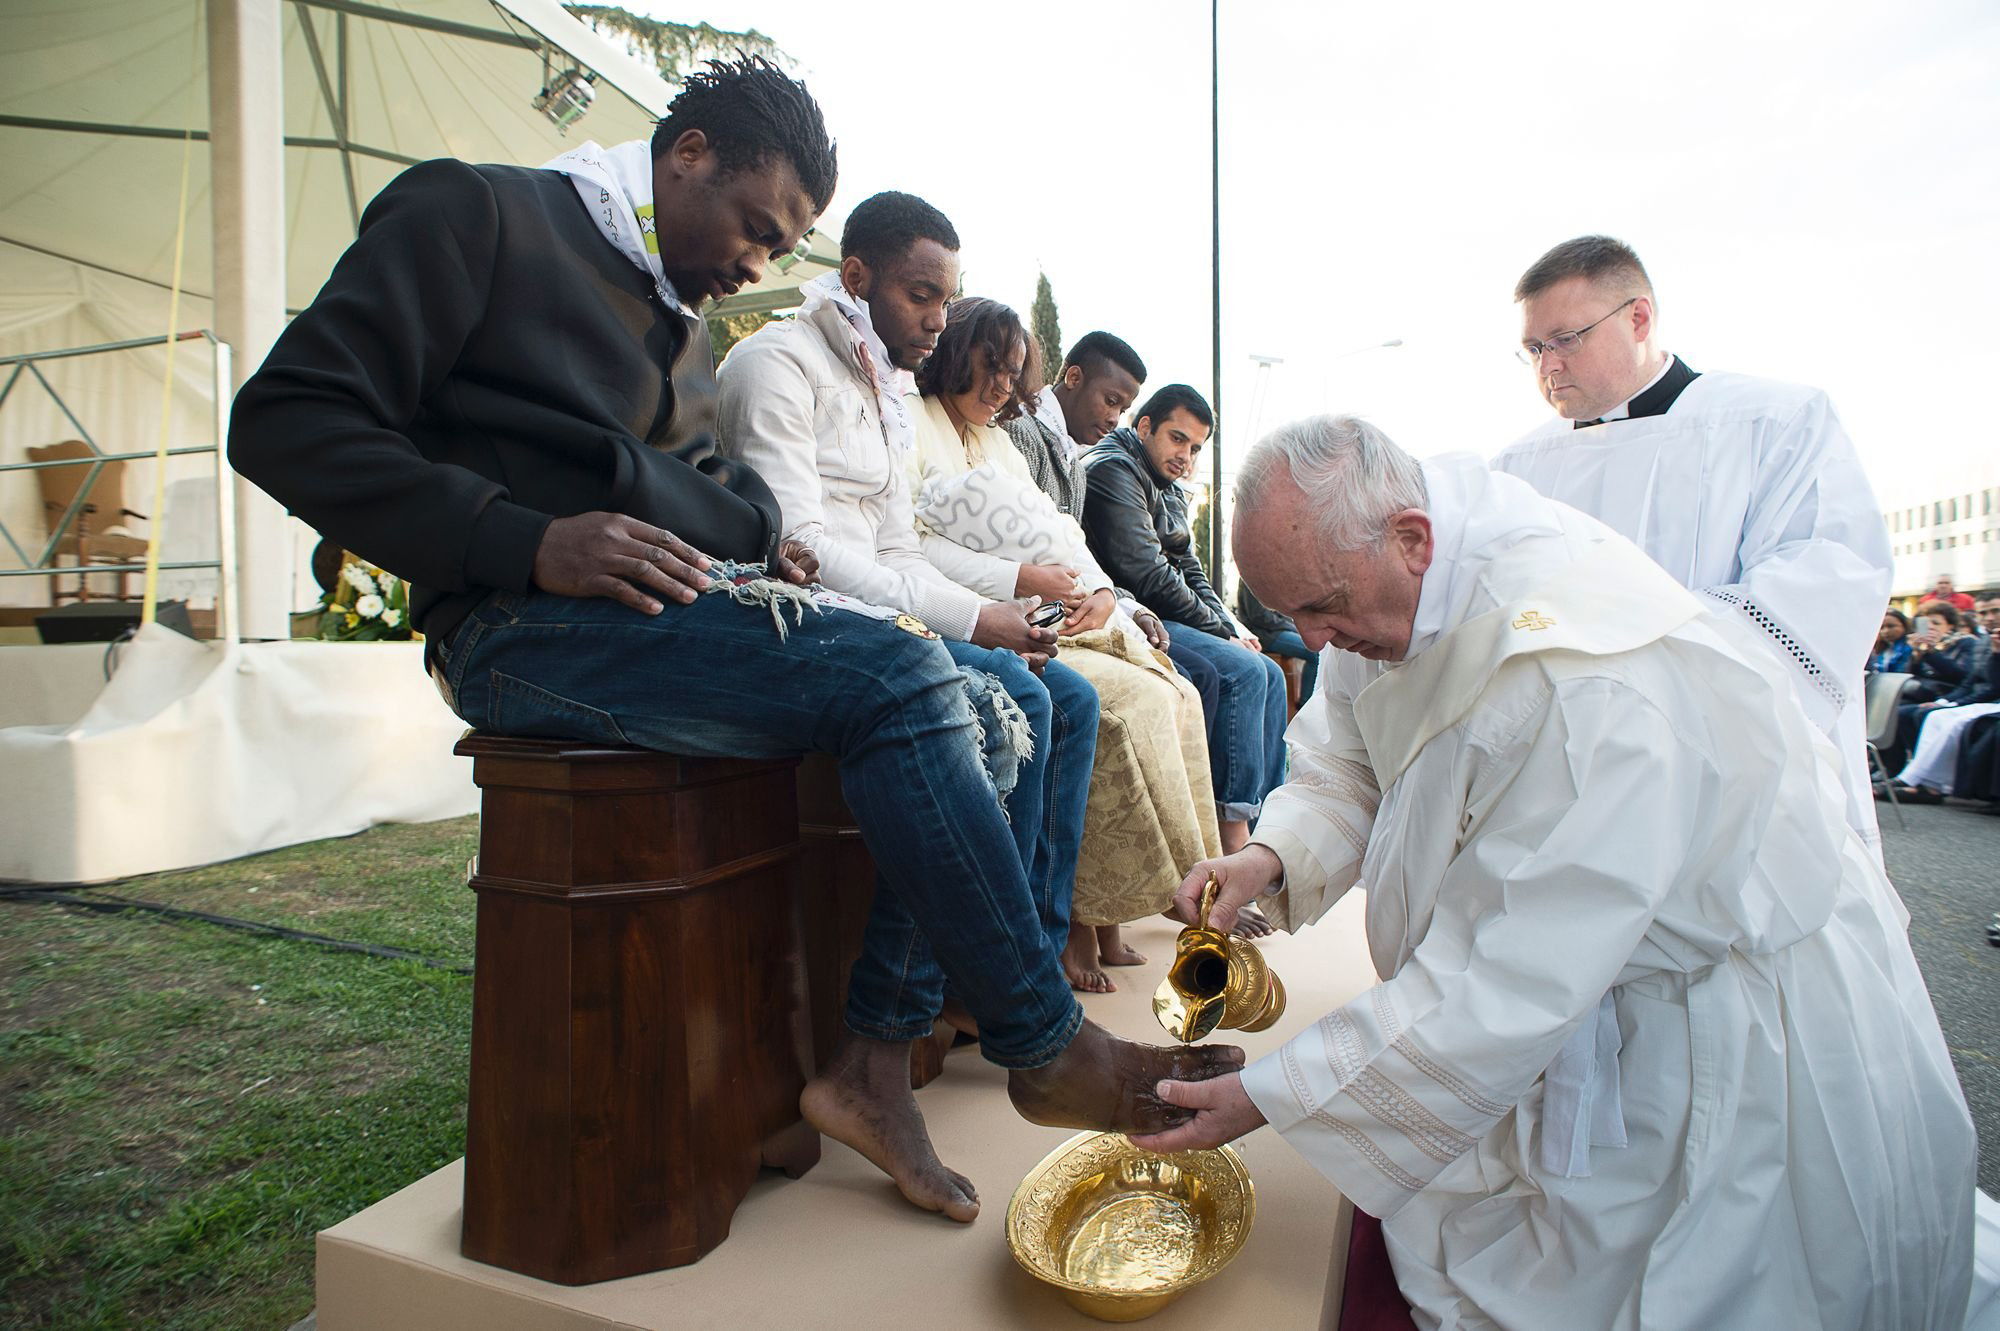 In this handout picture released by the Vatican Press Office, Pope Francis performs the foot-washing ritual at the Castelnuovo di Porto refugees center near Rome, Italy on March 24, 2016. Pope Francis washed the feet of 11 young asylum seekers and a worker at their reception centre to highlight the need for the international community to provide shelter to refugees.